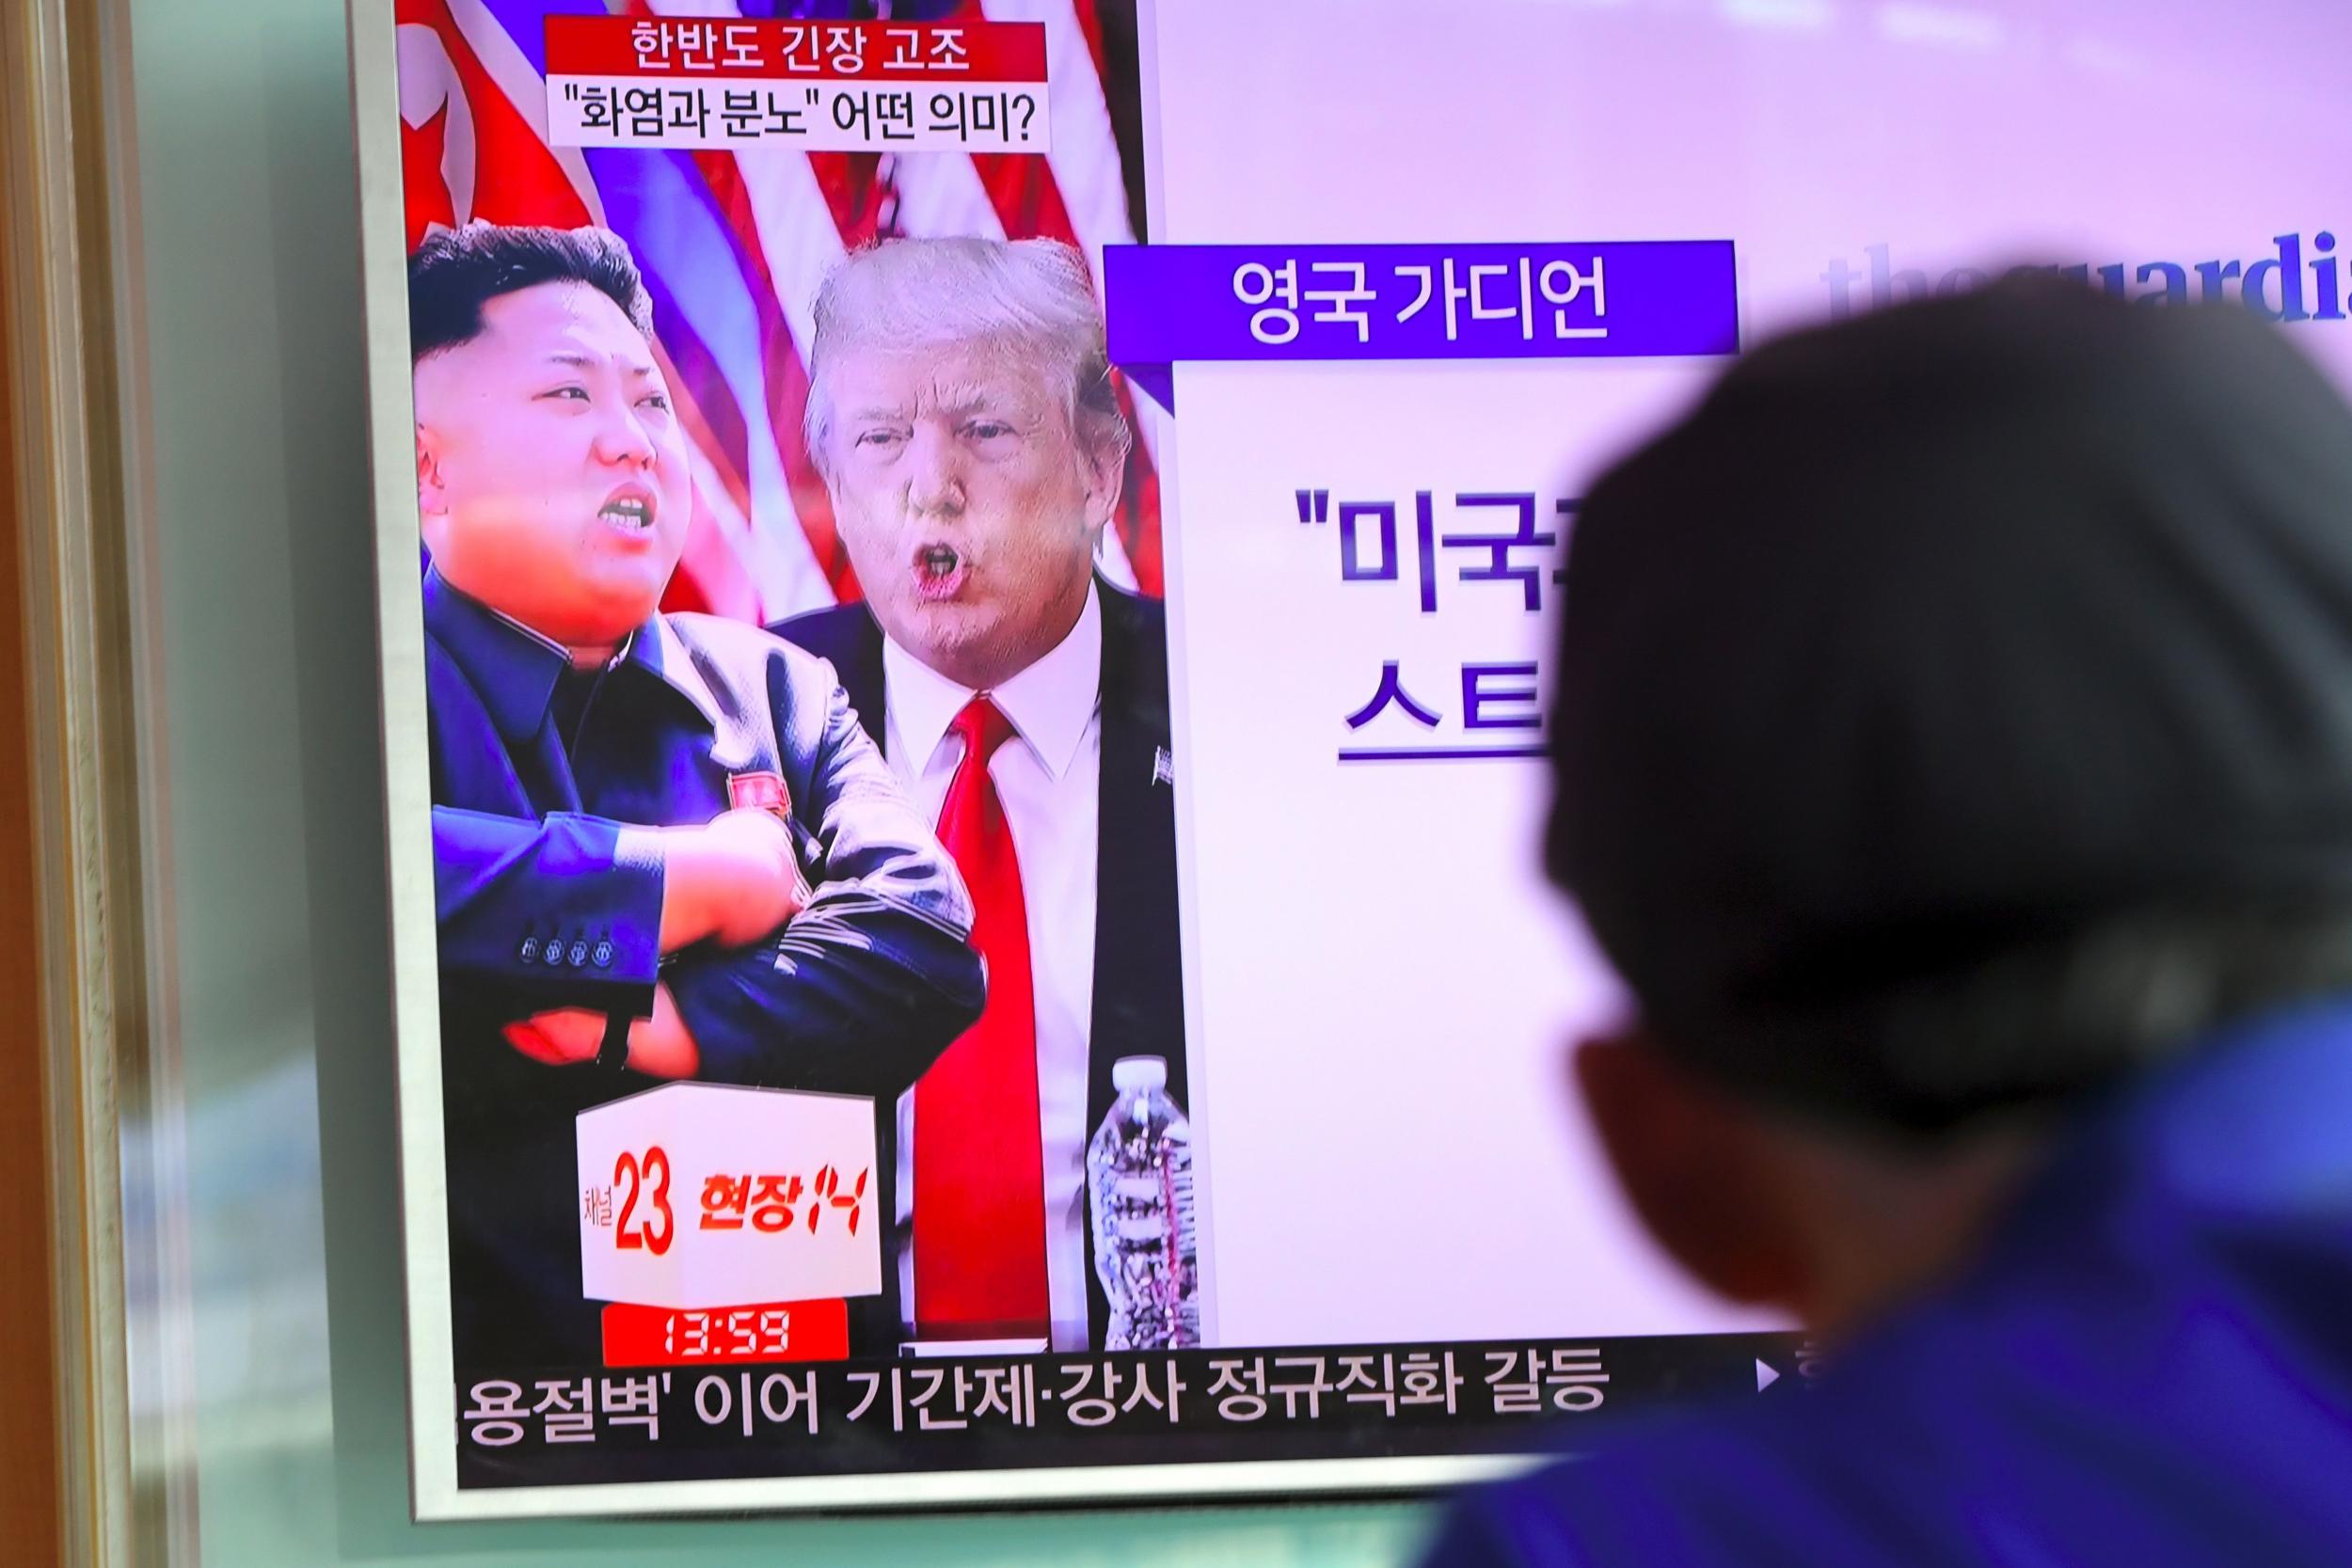 Tensions between North Korea and the United States have been heightened following provocative missile tests by Pyongyang